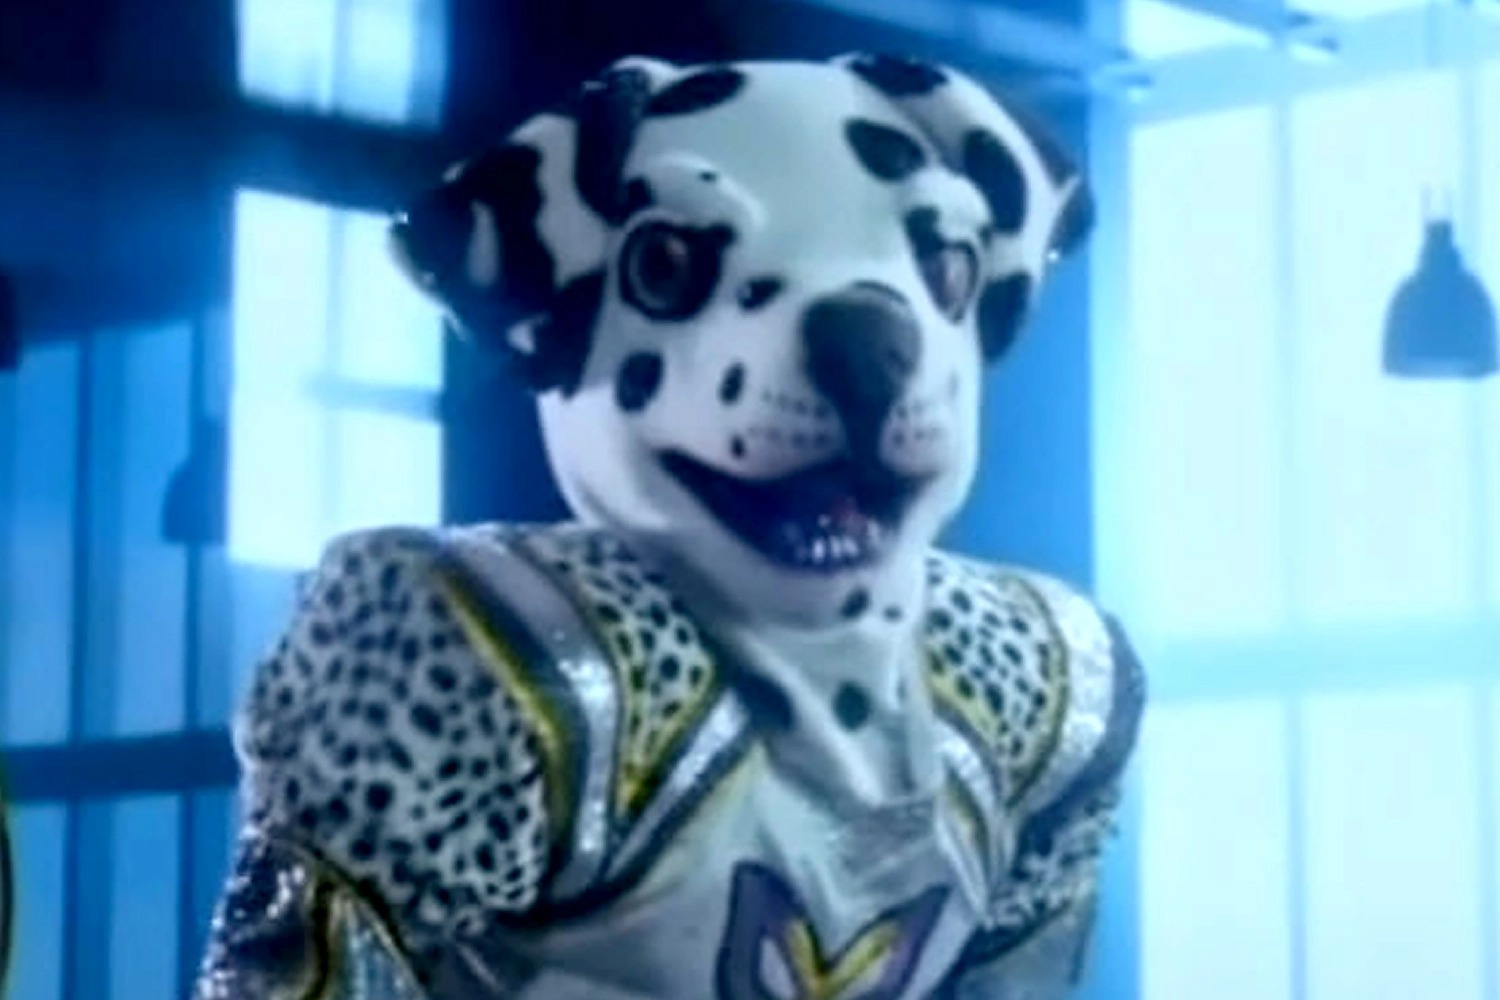 Who is Dalmatian in the TV Show ” The Masked Singer”?